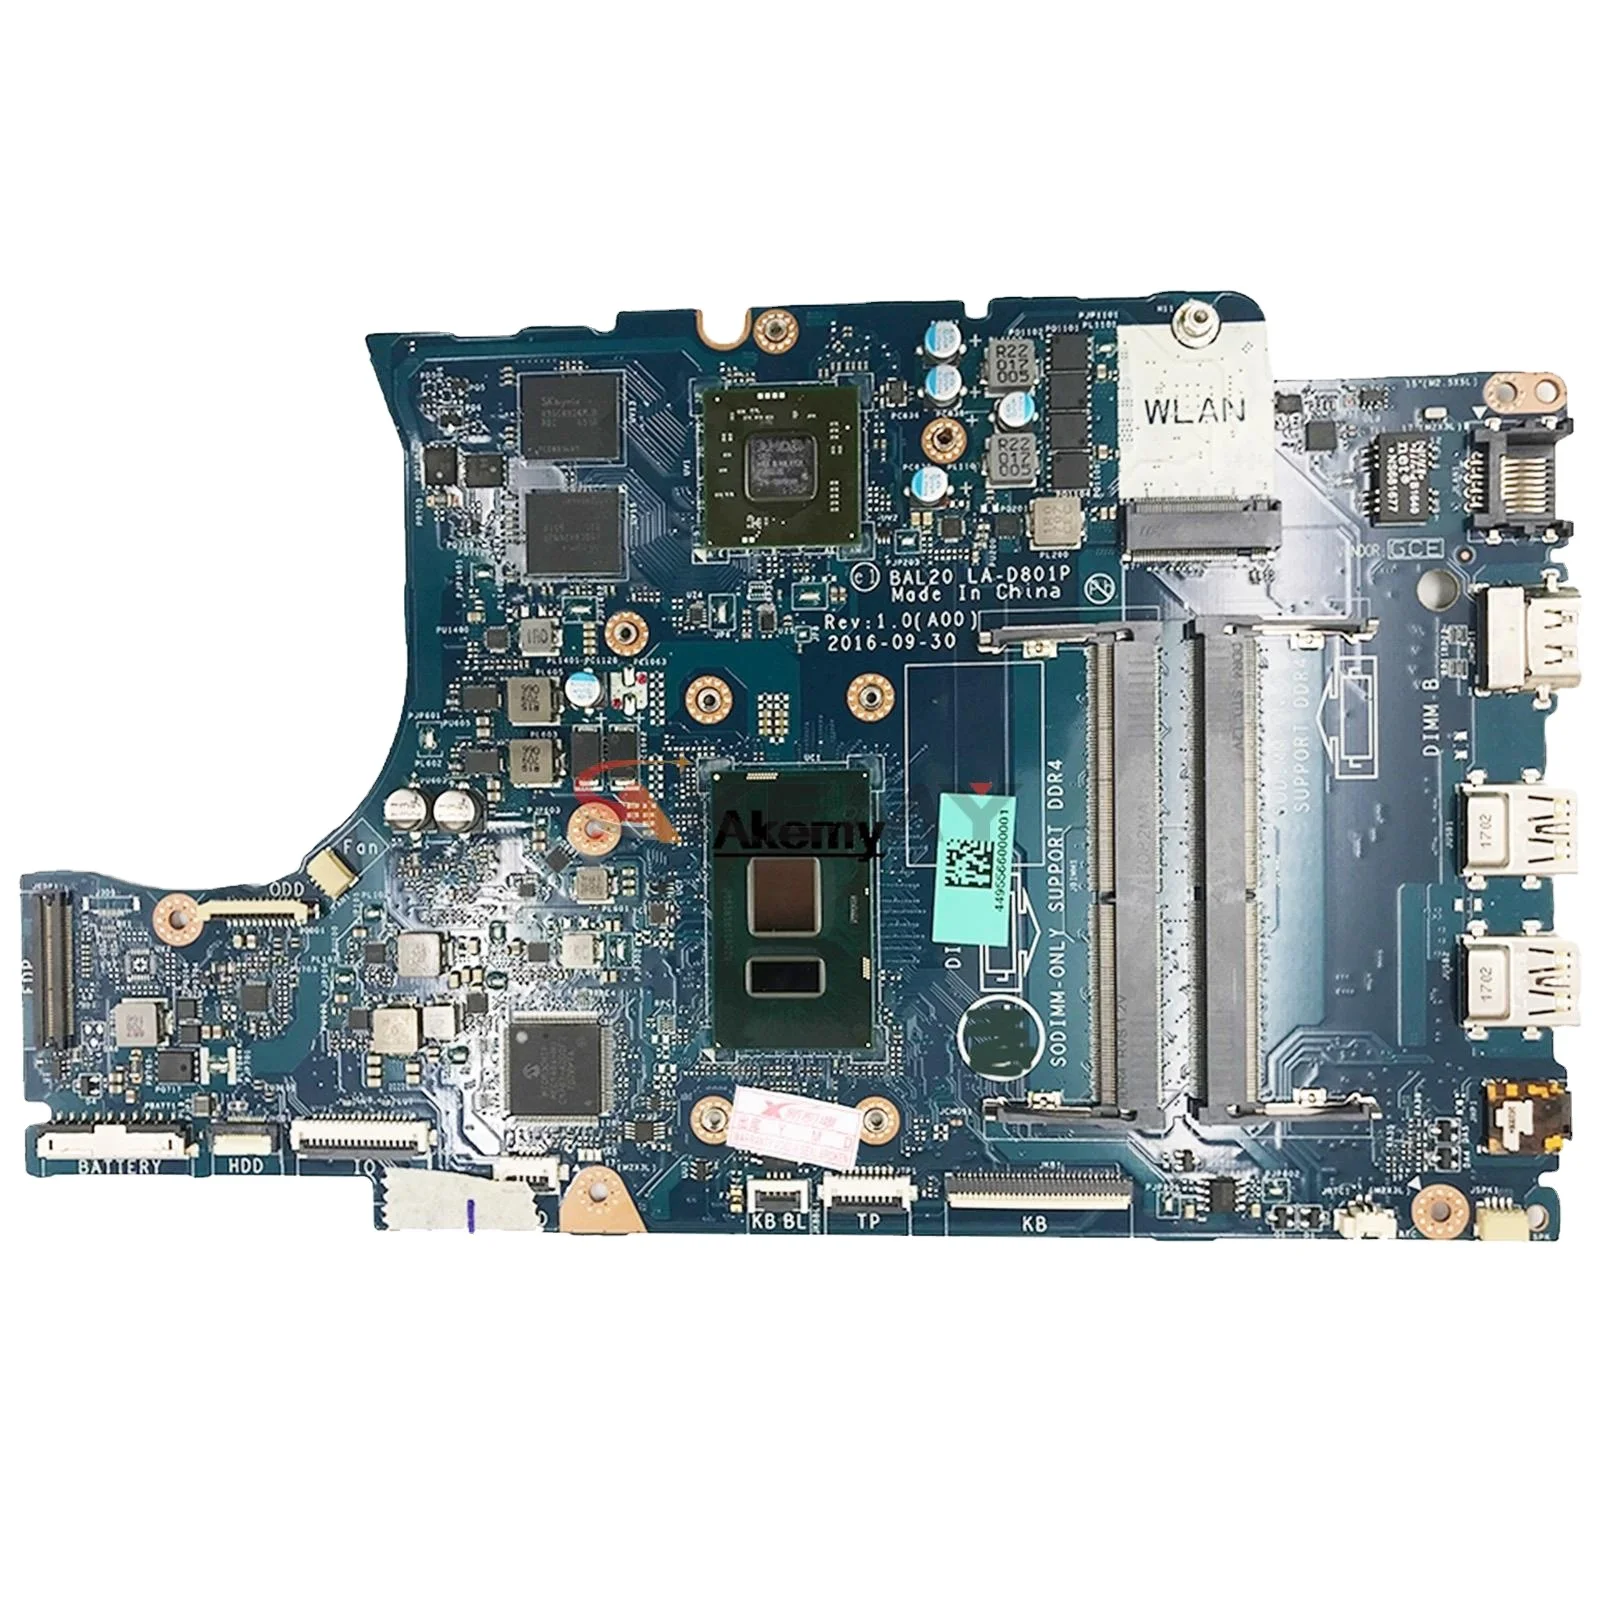 

For Dell inspiron 15-5567 5567 Laptop motherboard BAL20 LA-D801P CN-02PVGT 02PVGT I5 I7 7th Gen CPU R7 M445 GPU DDR4